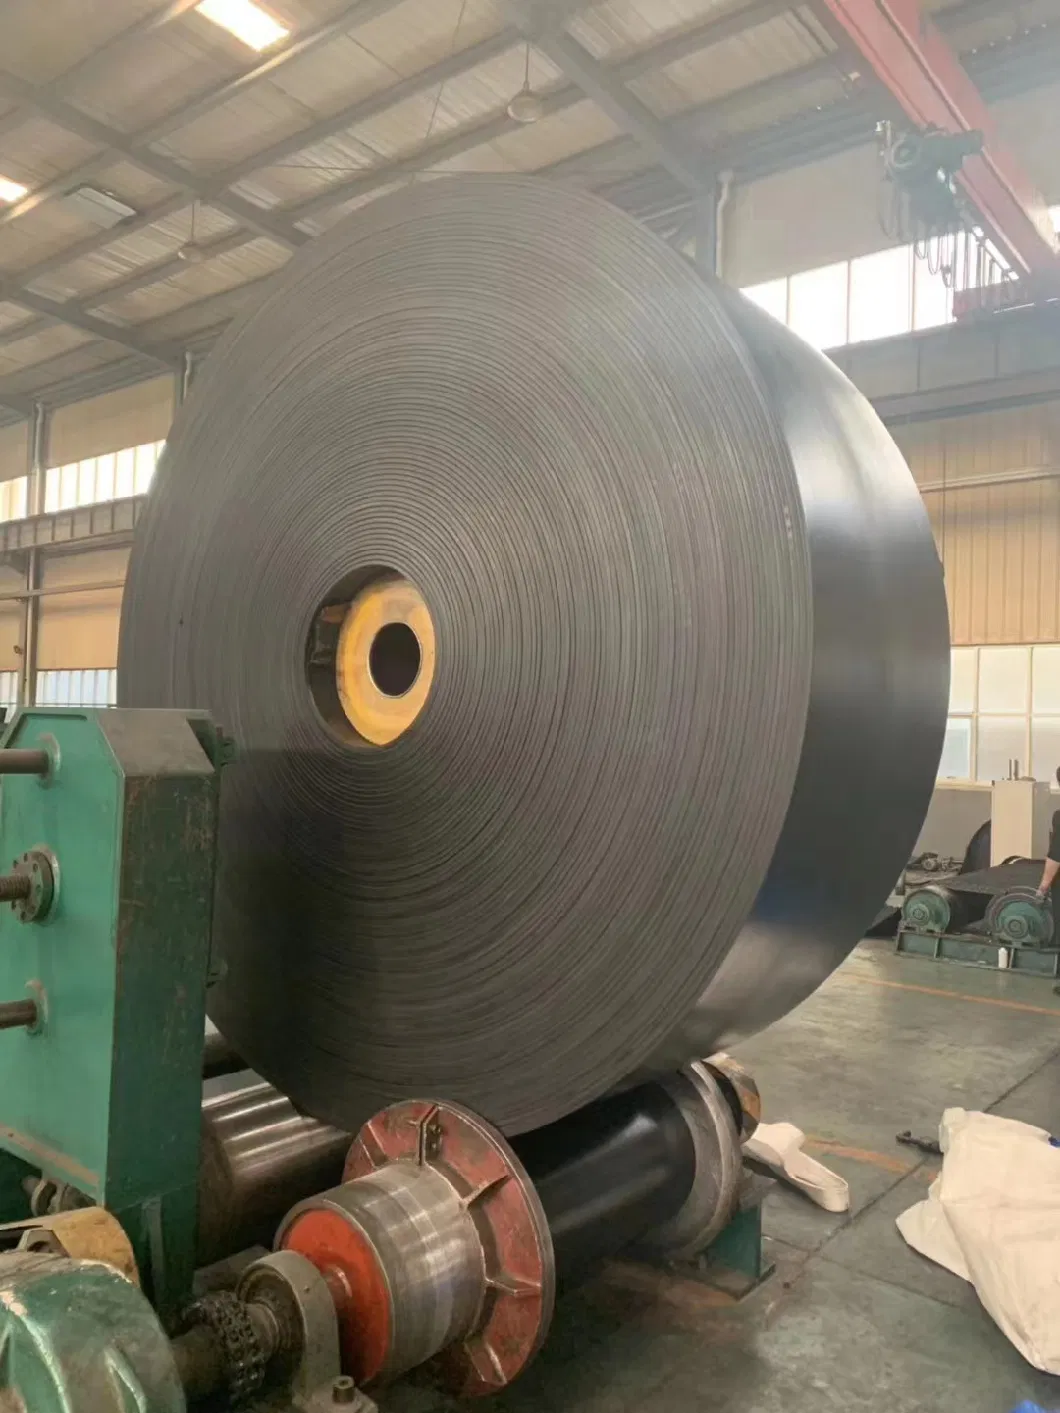 Width 1200mm 1400mm Ep100 Ep200 Ep300 Ep400 Ep500 Ep600 Rubber Conveyor Belt for Coal/Mining/Sand/Stone/Asphalt/Quarry/Foundry/Metallurgy of Industry